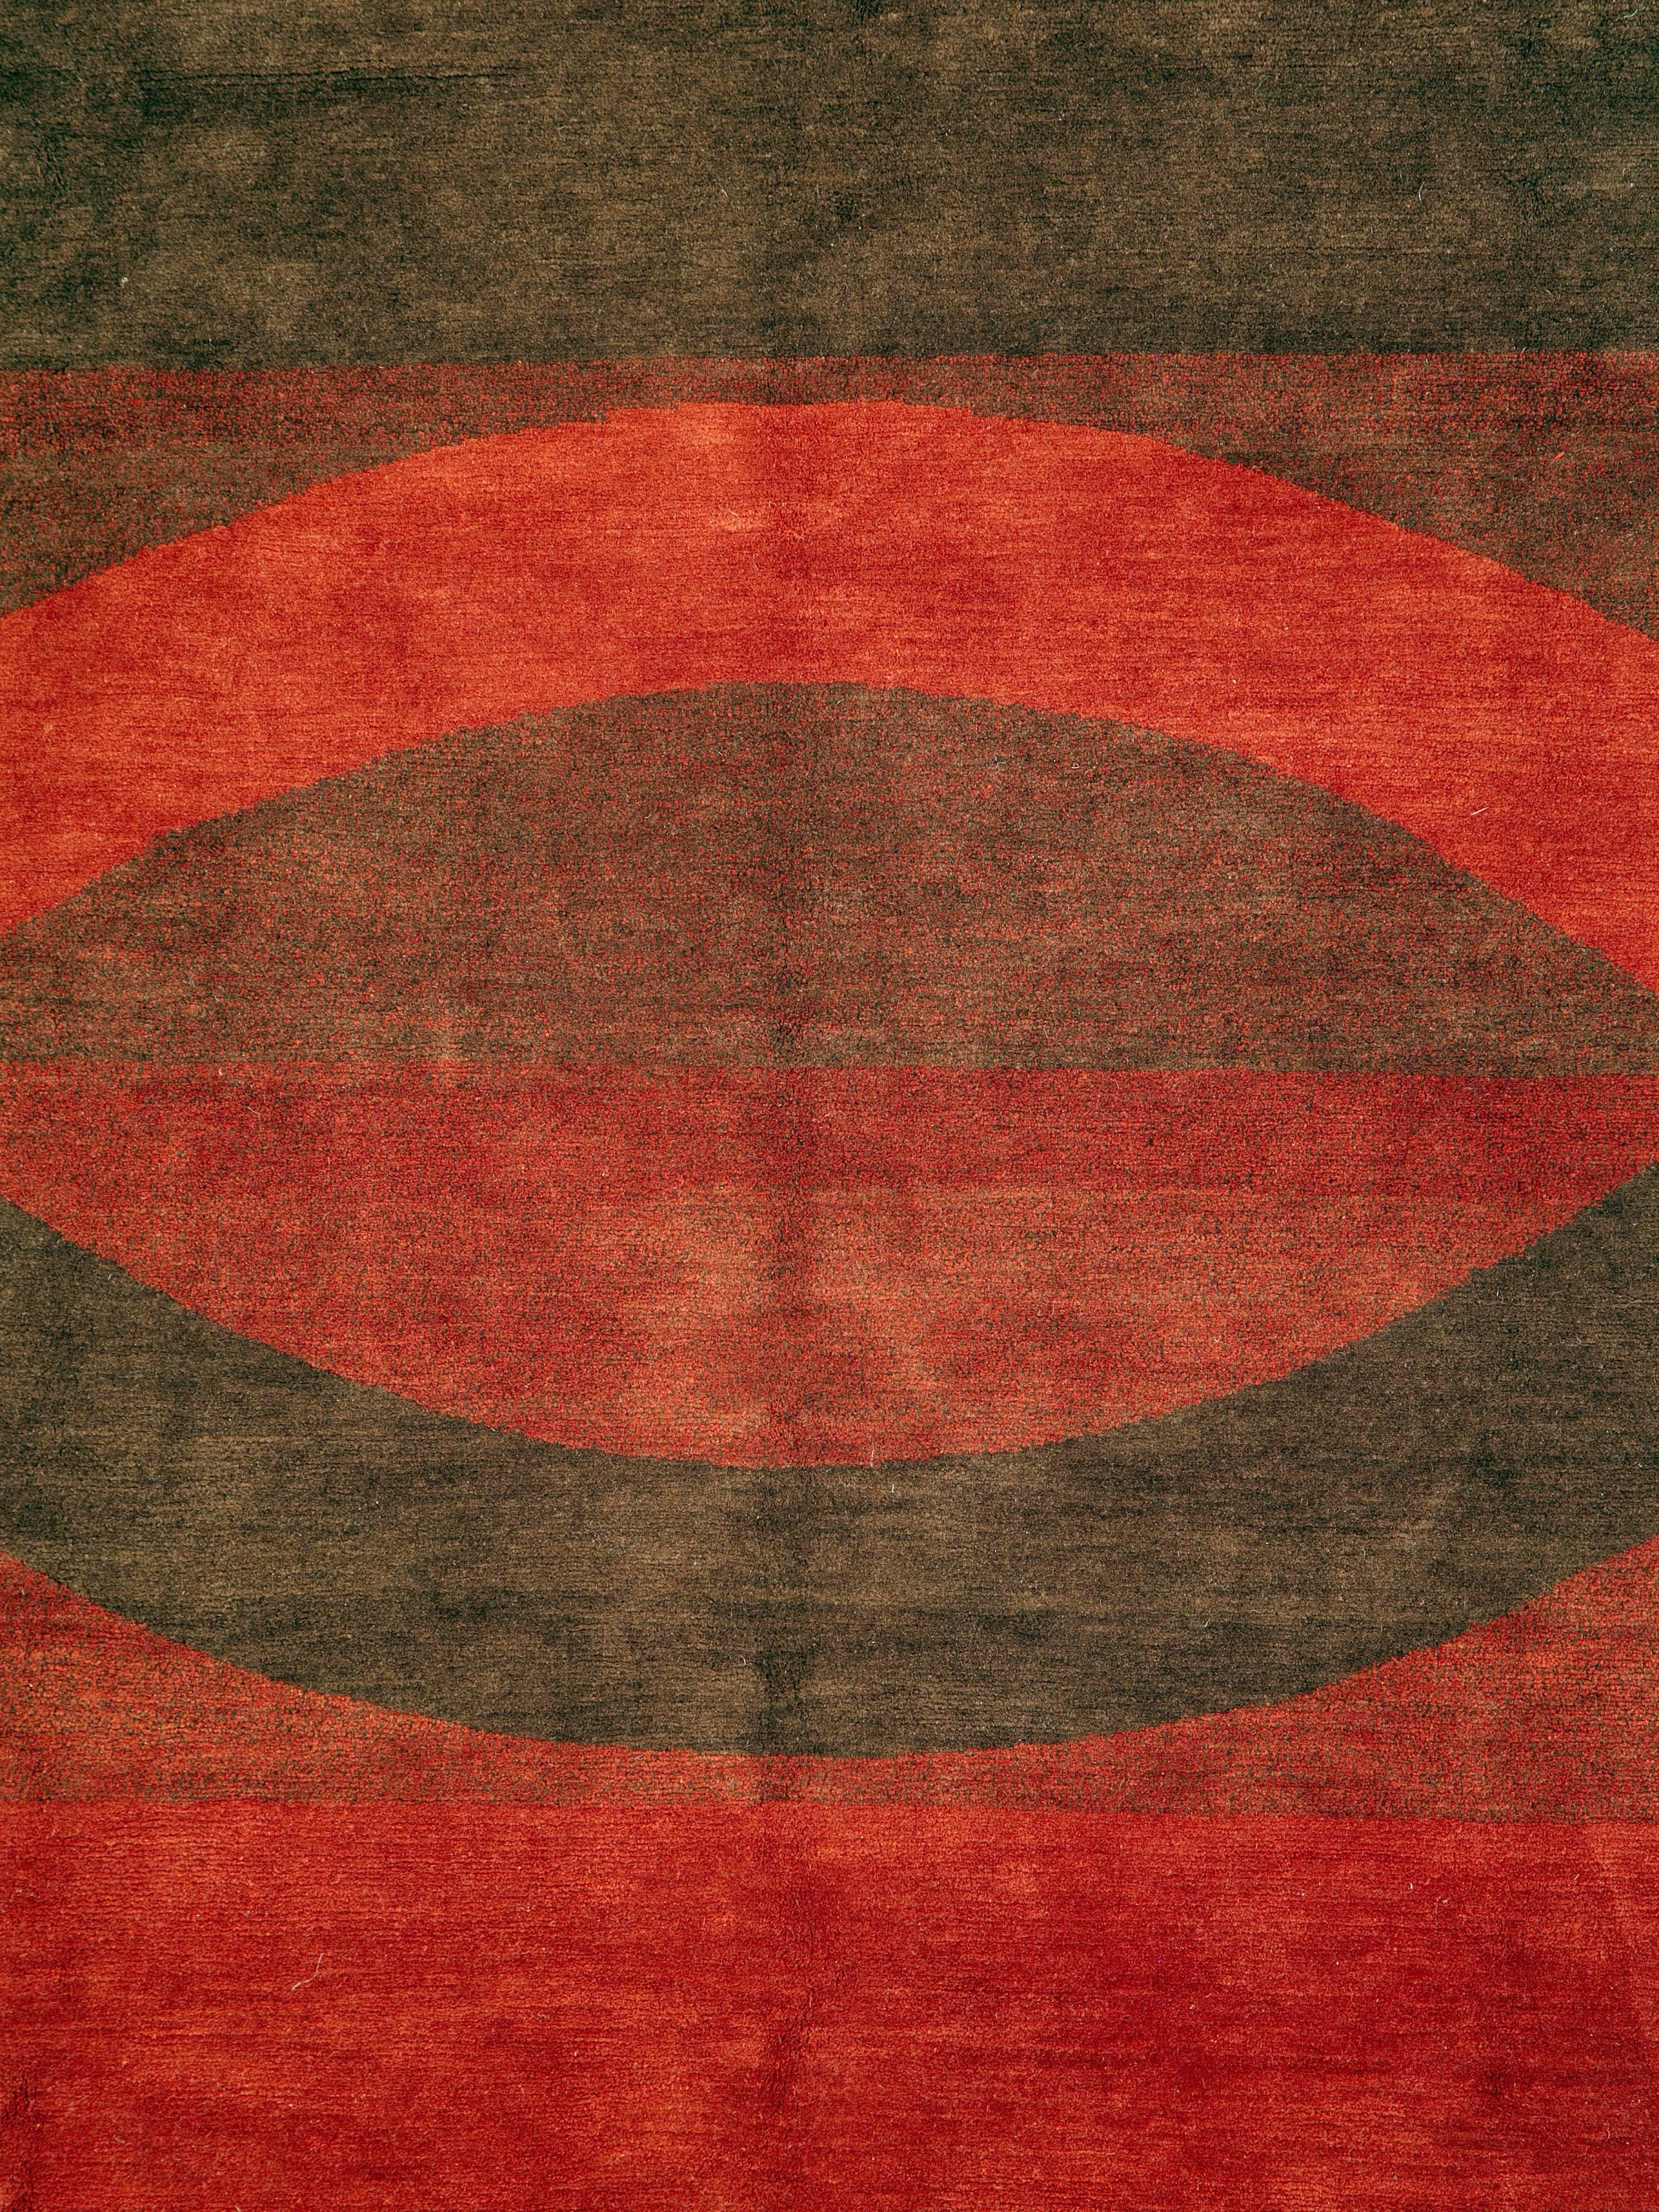 A modern Tibetan deco rug from the 21st century.